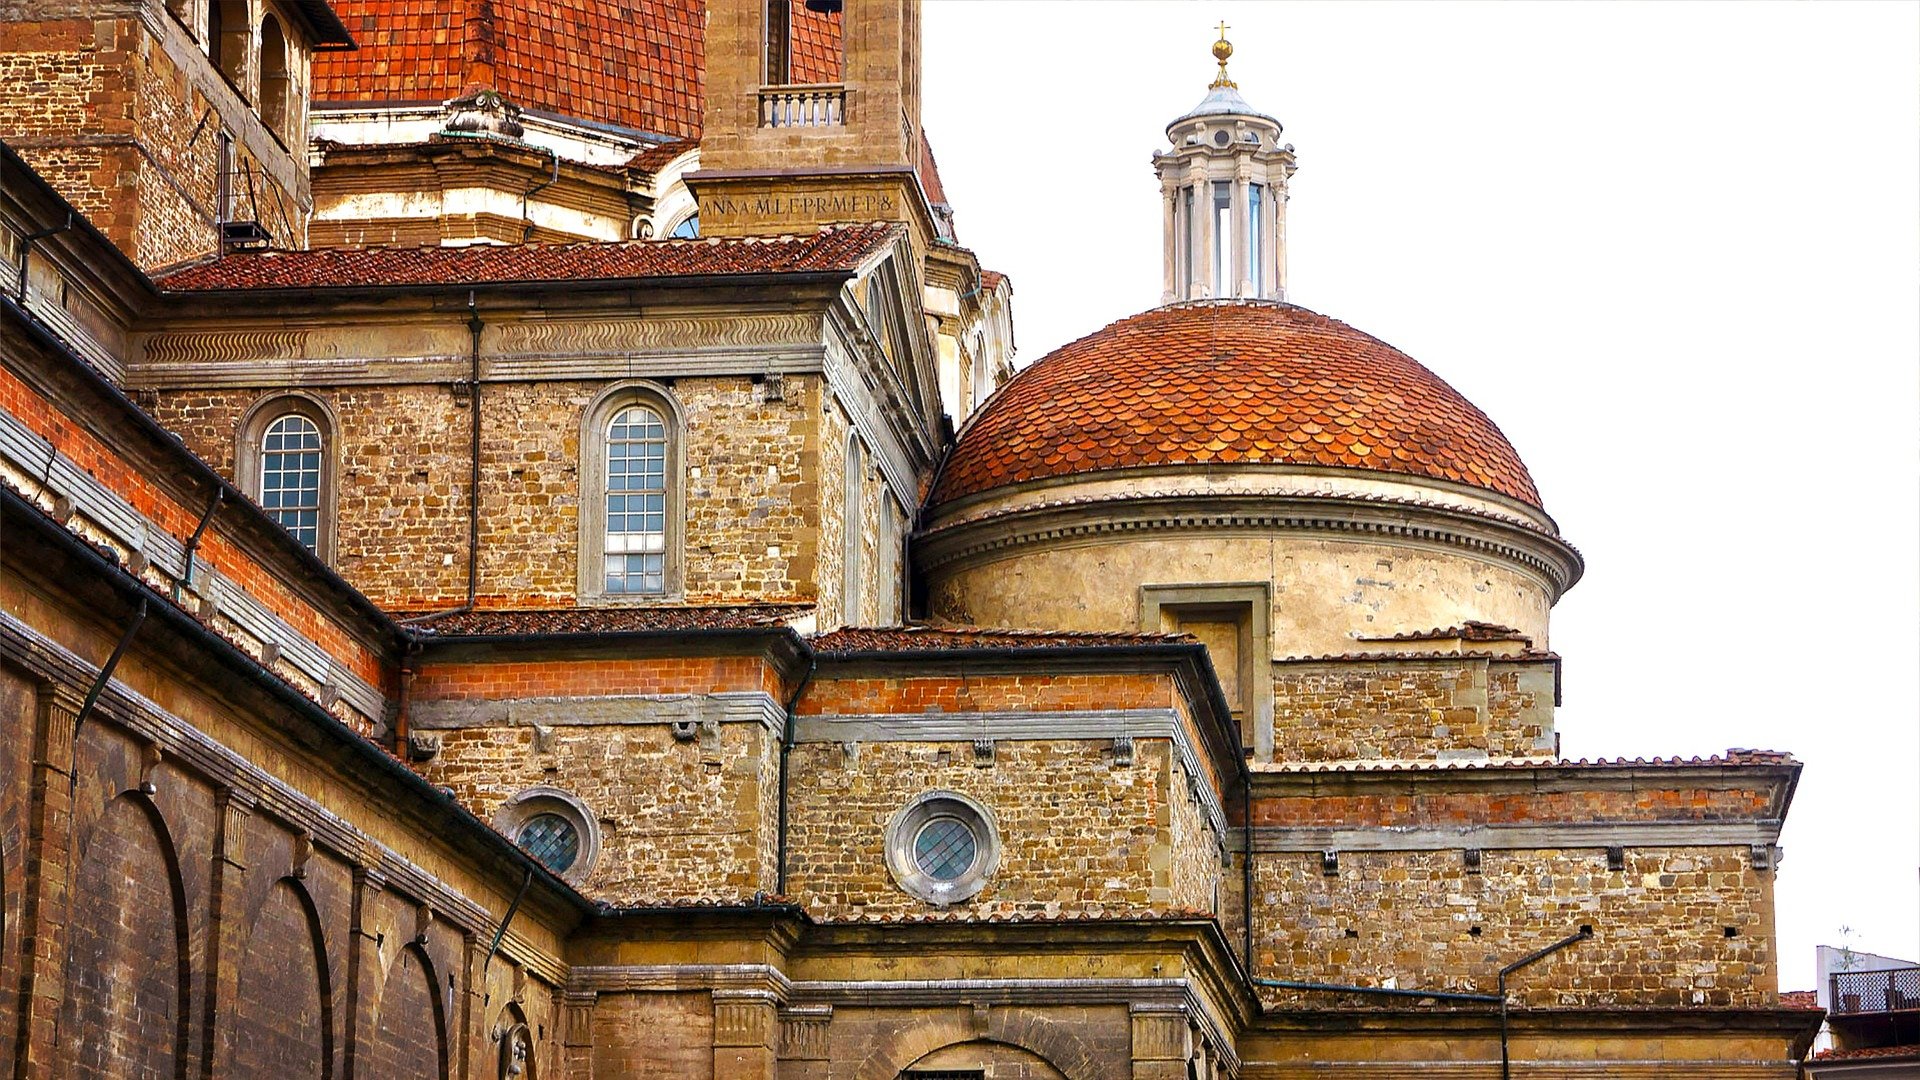 Guided tour of the treasures of the Medici Chapels in Florence